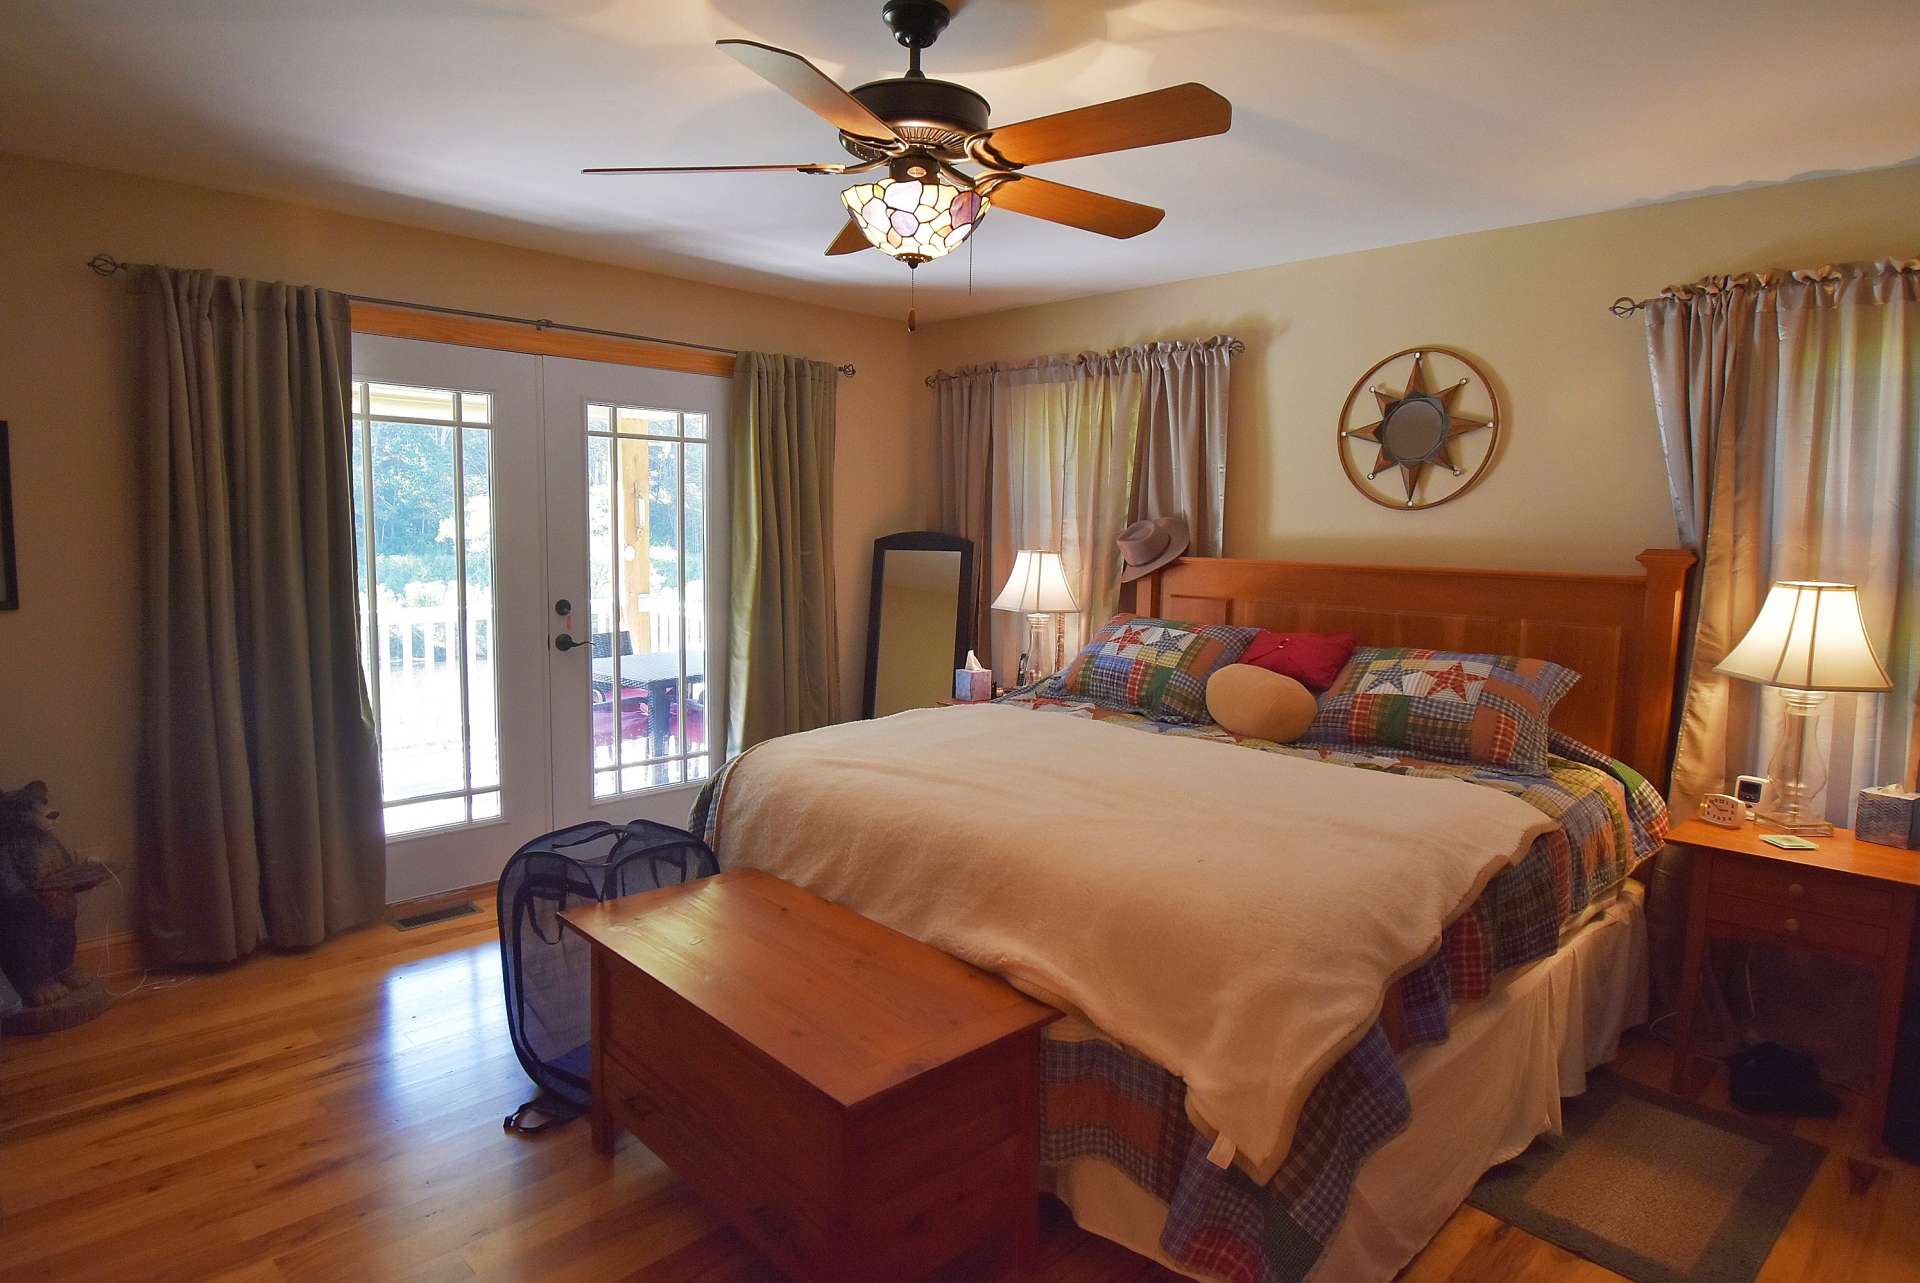 Conveniently located on the main level, the master suite boasts beautiful hardwood flooring, private access to the back deck, and a private bath.